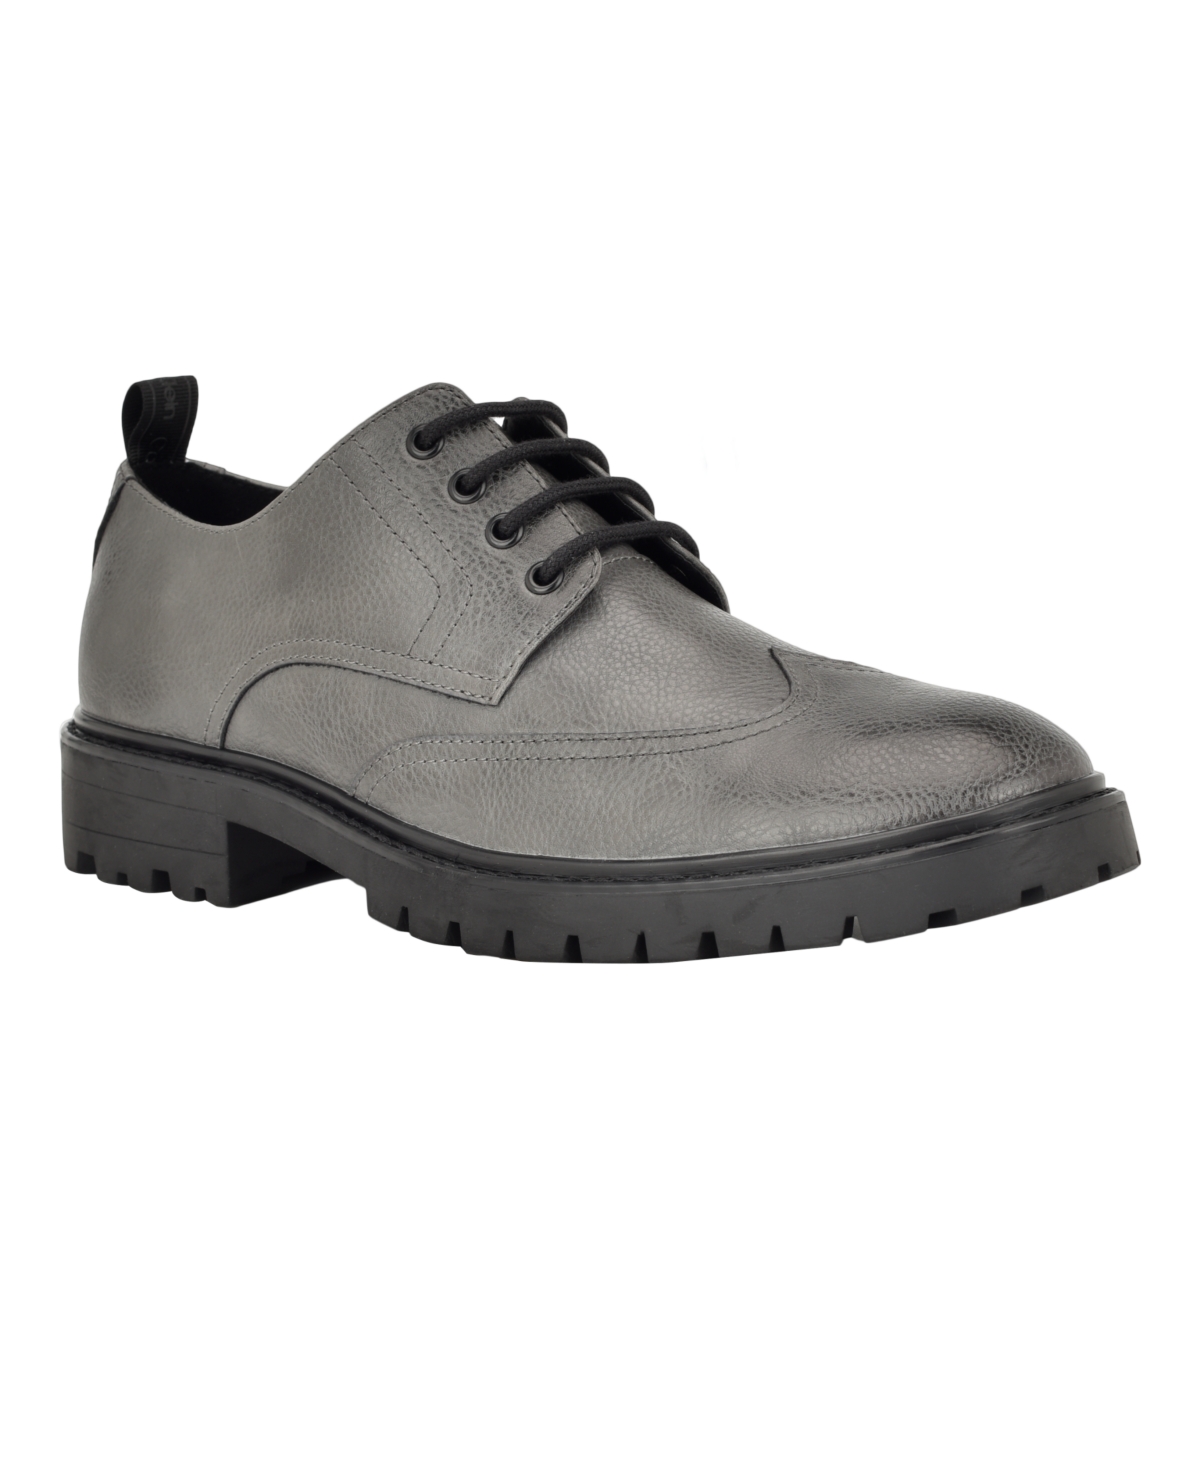 CALVIN KLEIN MEN'S LING DRESS LACE-UP LOAFERS